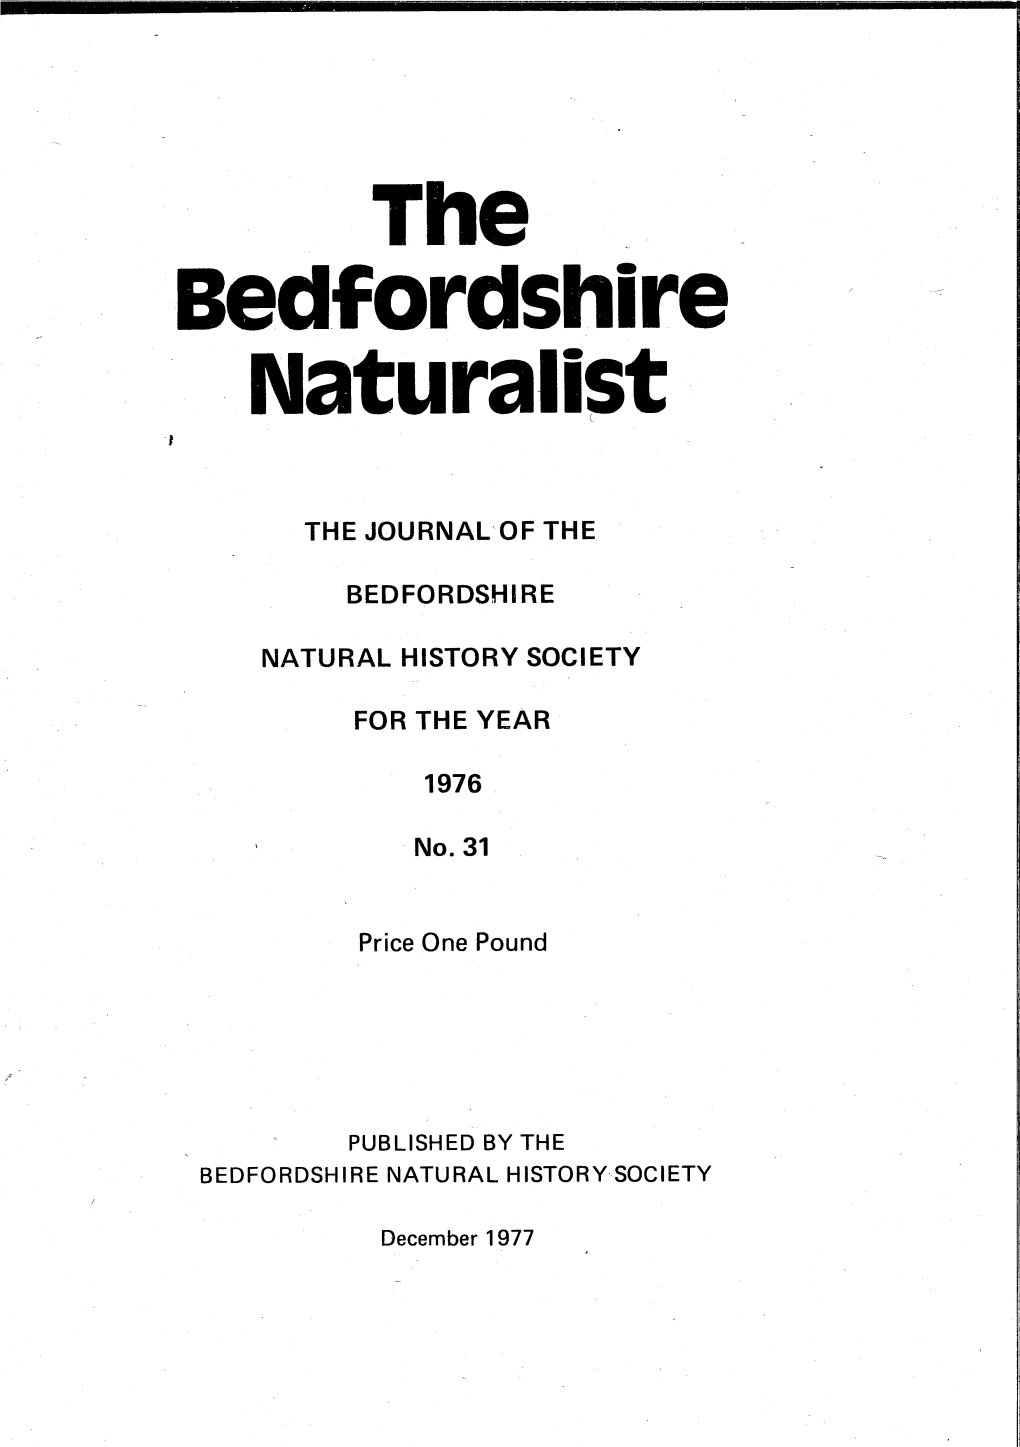 The Bedfordshire Naturalist